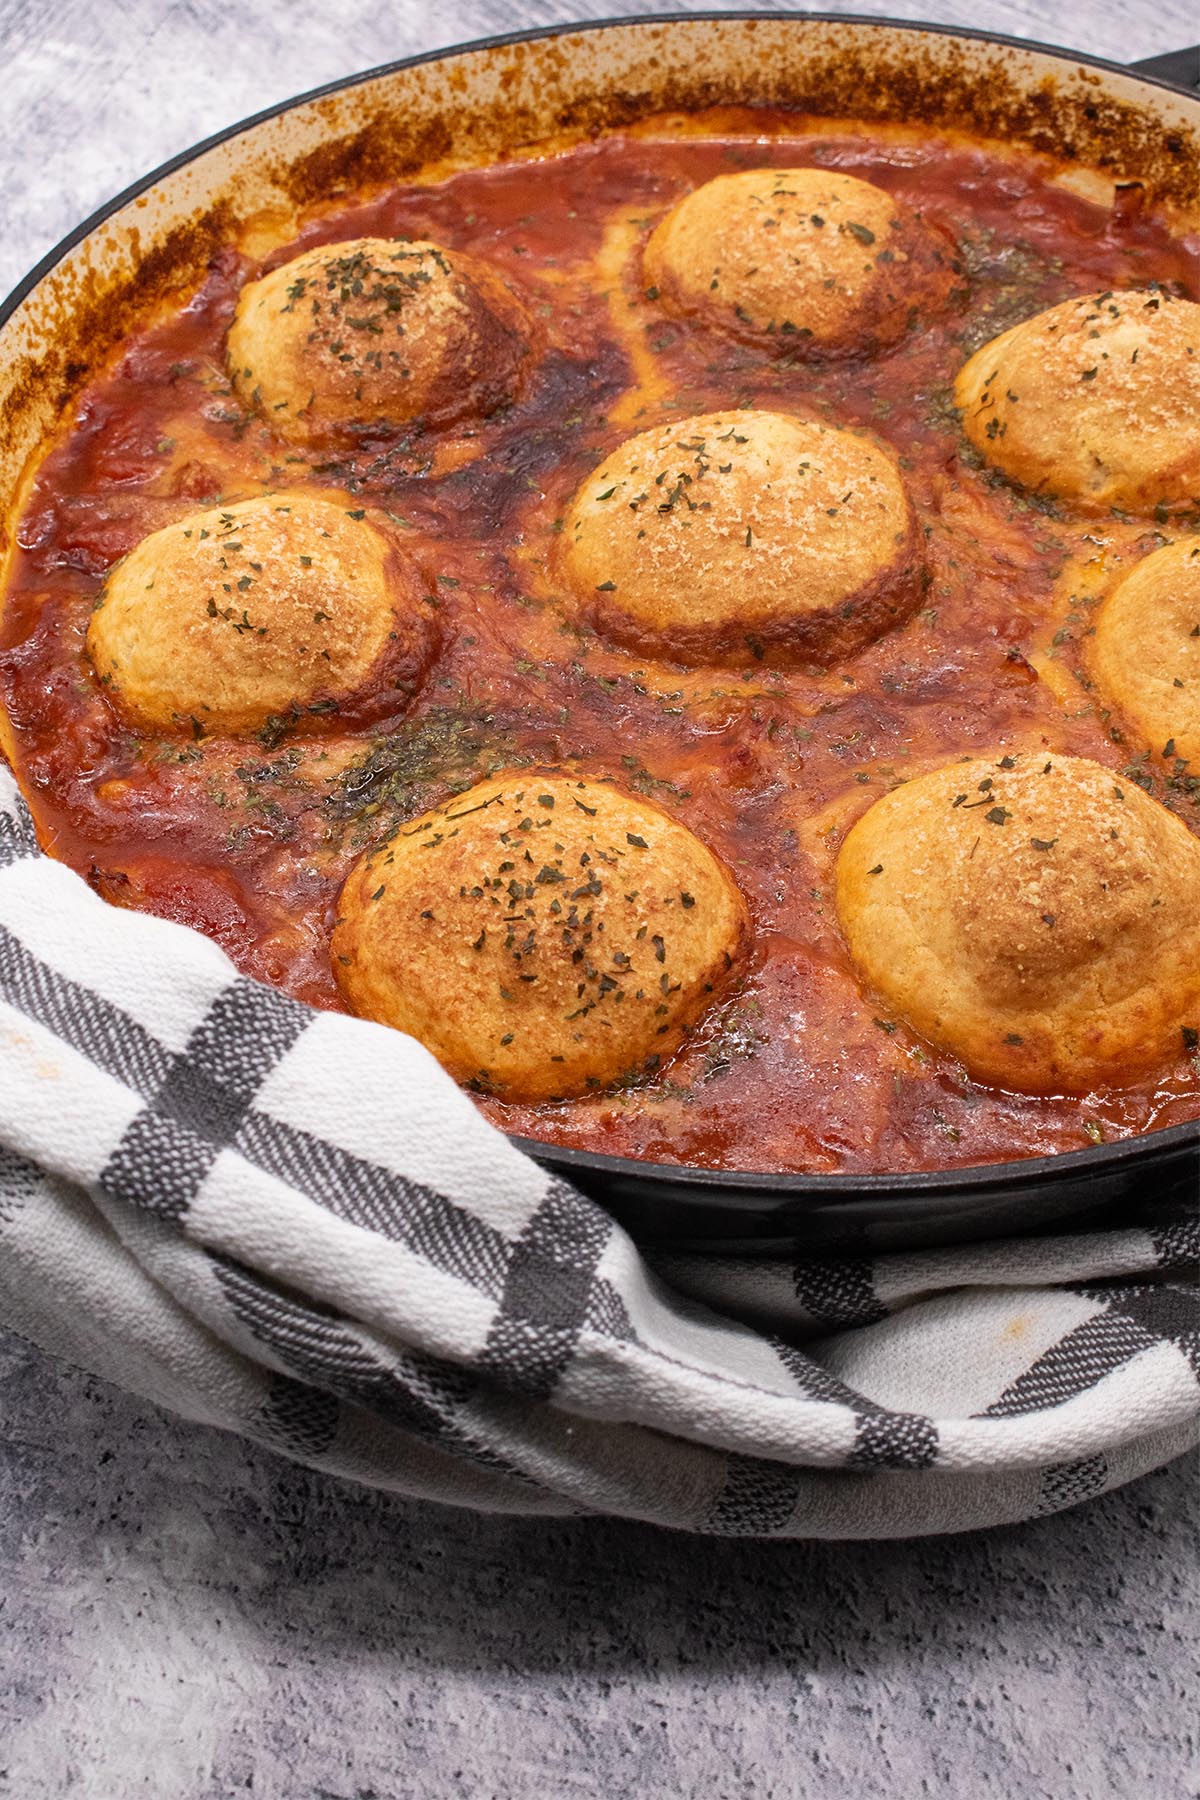 Chicken arrabbiata stew and parmesan dumplings in round casserole dish with black and white towel